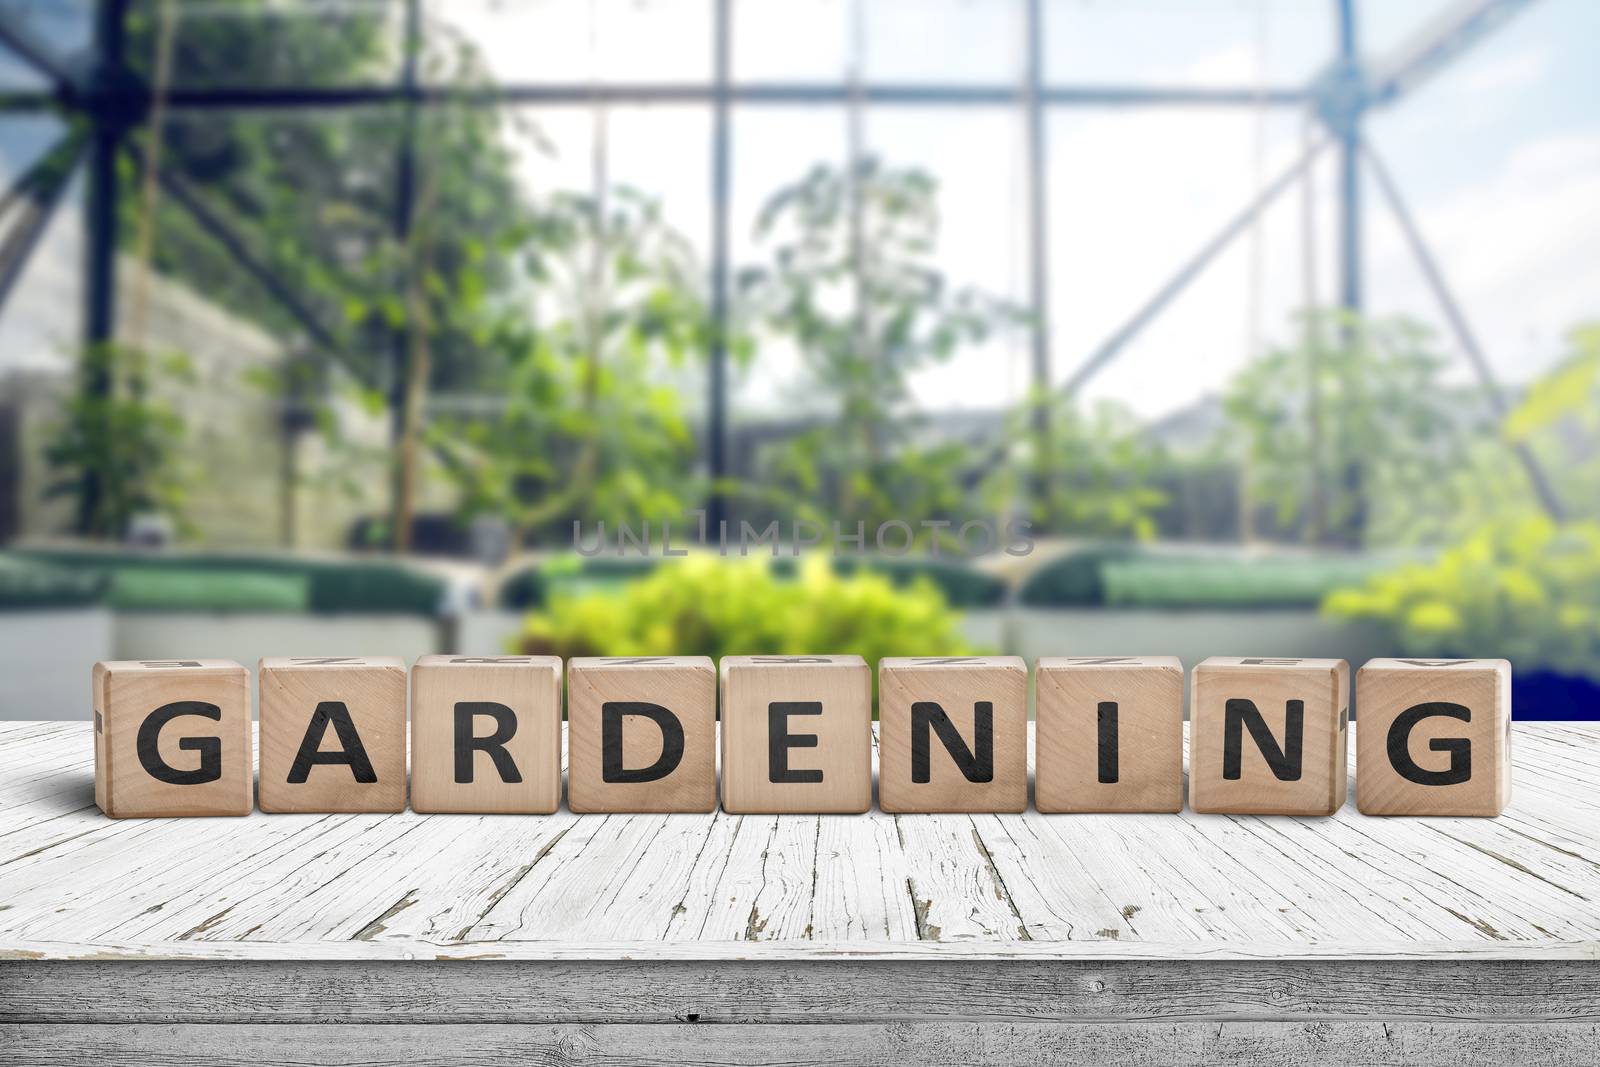 Gardening sign in a green house on a wooden by Sportactive